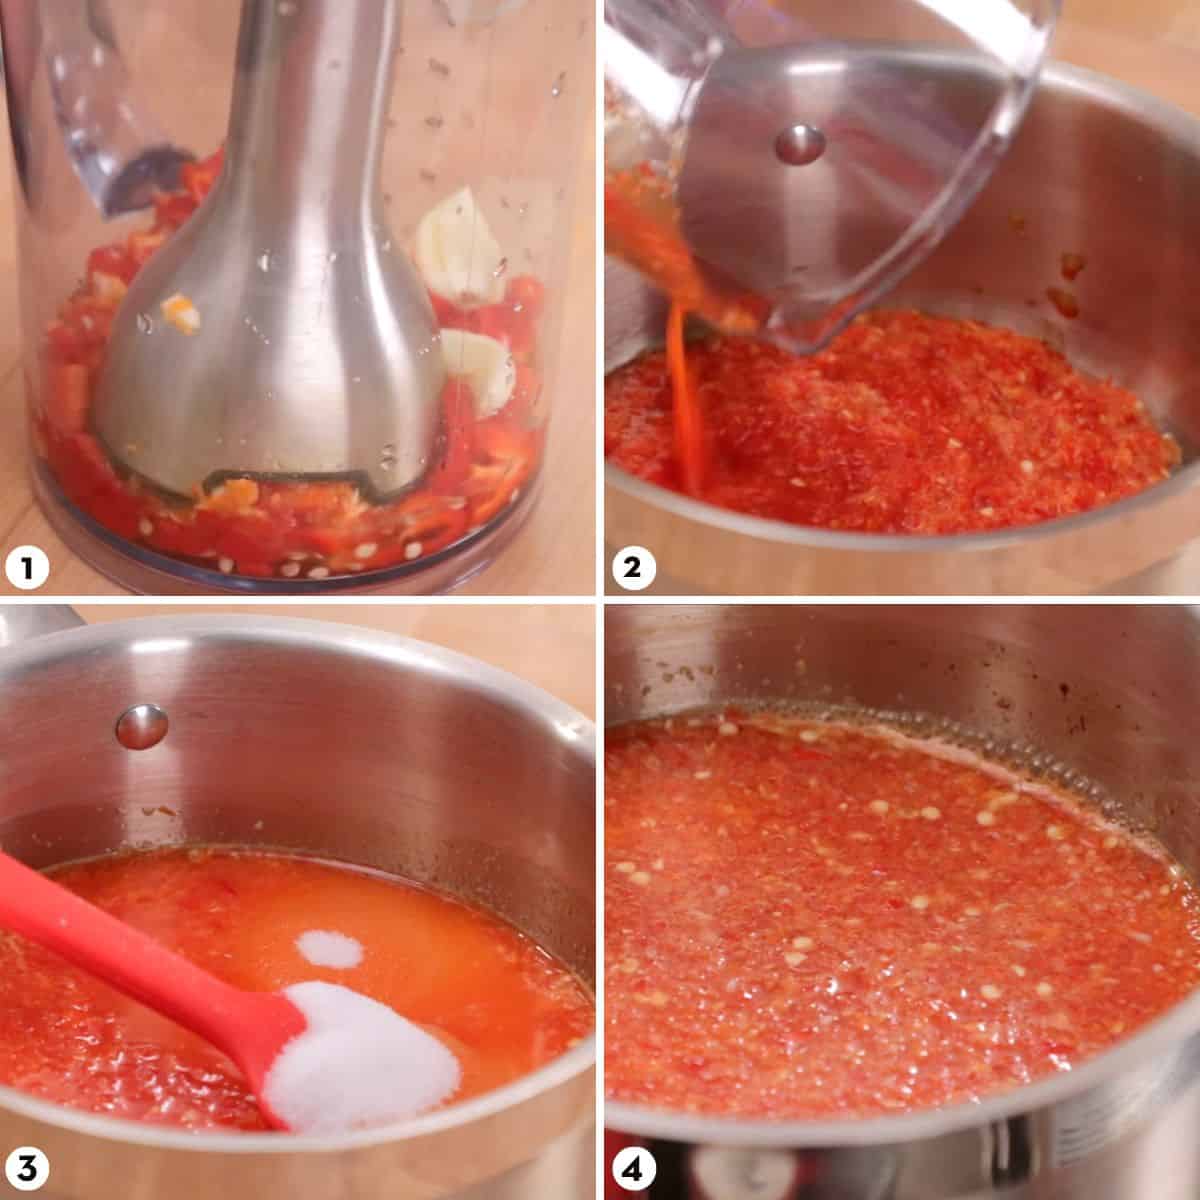 Process shots for how to make thai sweet chili sauce, steps 1-4